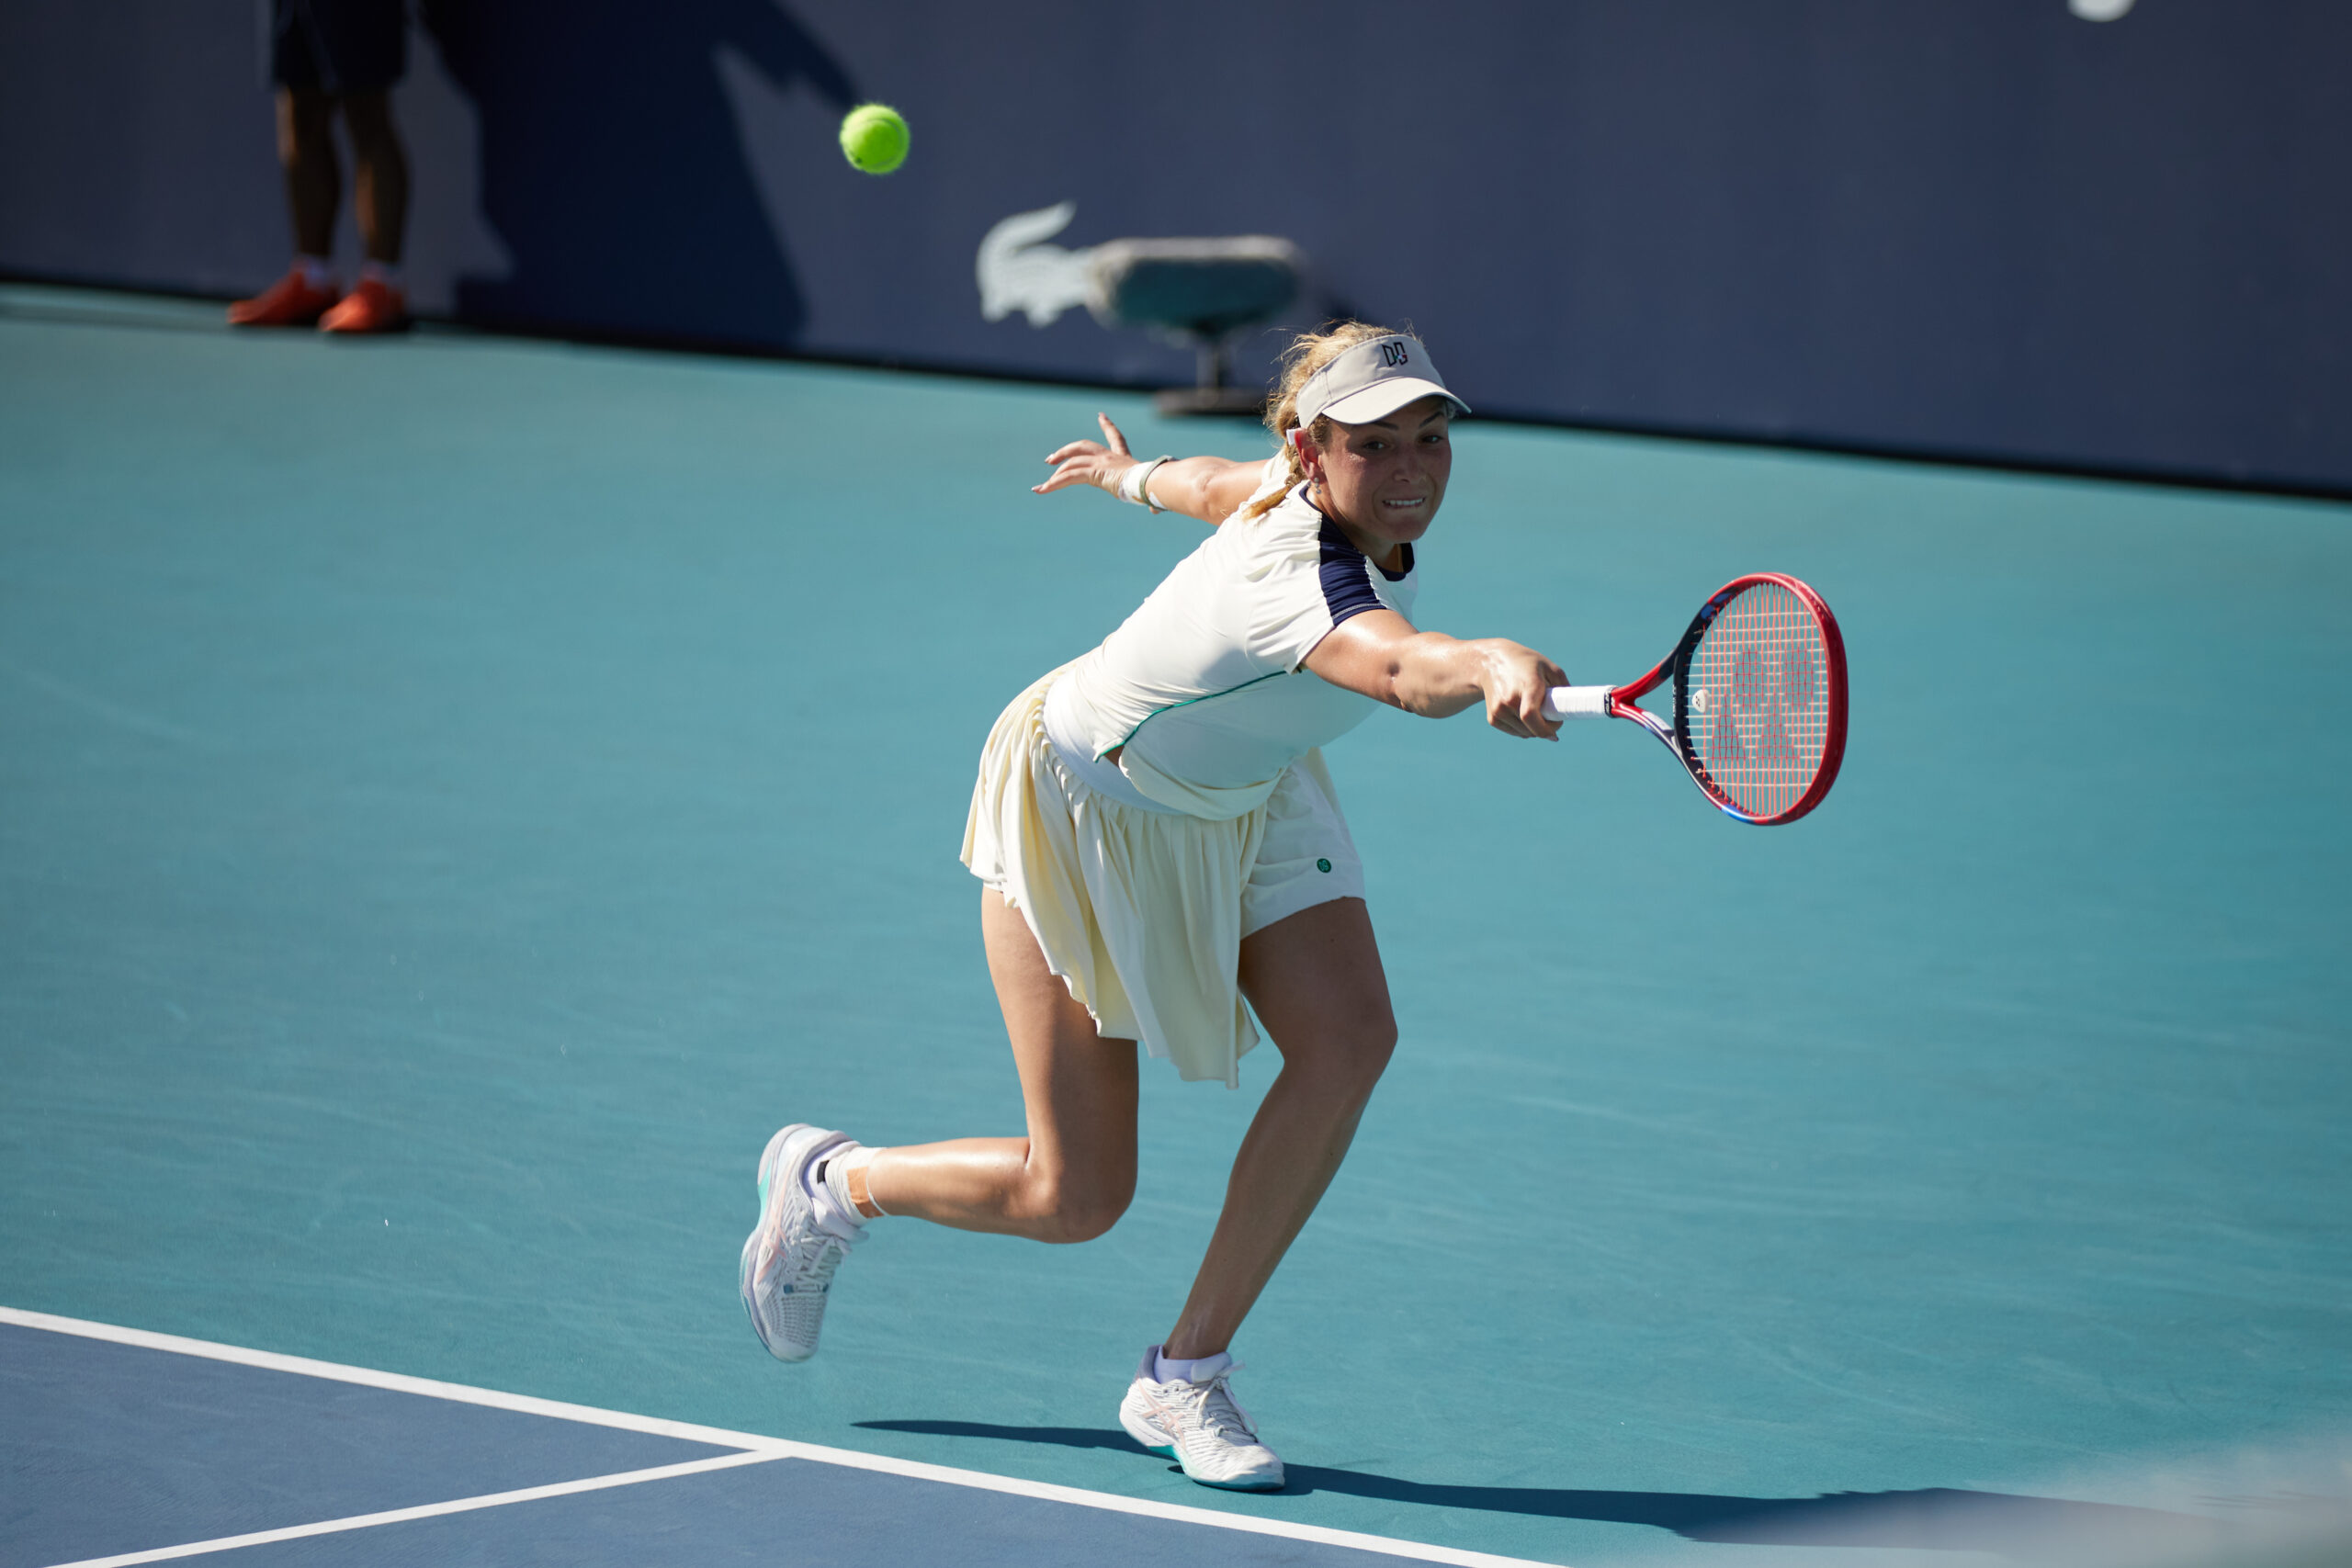 Donna Vekic stretches wide for a backhand during her match against Petra Kvitova on March 26 at the 2023 Miami Open in Miami Gardens, FL.